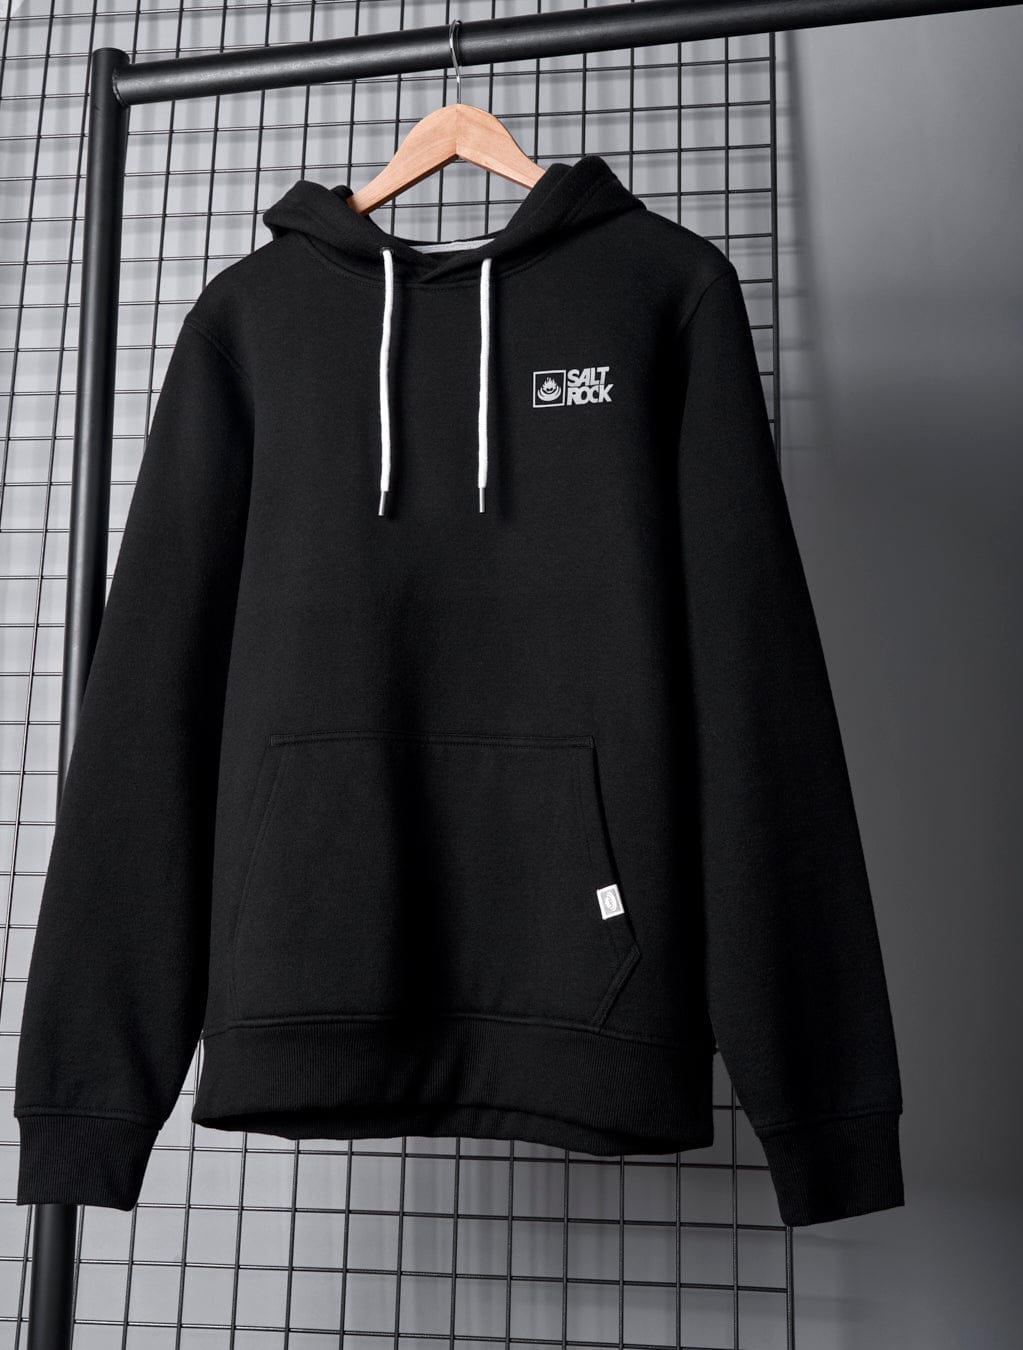 A Saltrock Original - Mens Pop Hoodie in Black, crafted from soft jersey material, with white drawstrings is displayed on a wooden hanger against a tiled wall background, featuring a small Saltrock branding logo on the left chest.